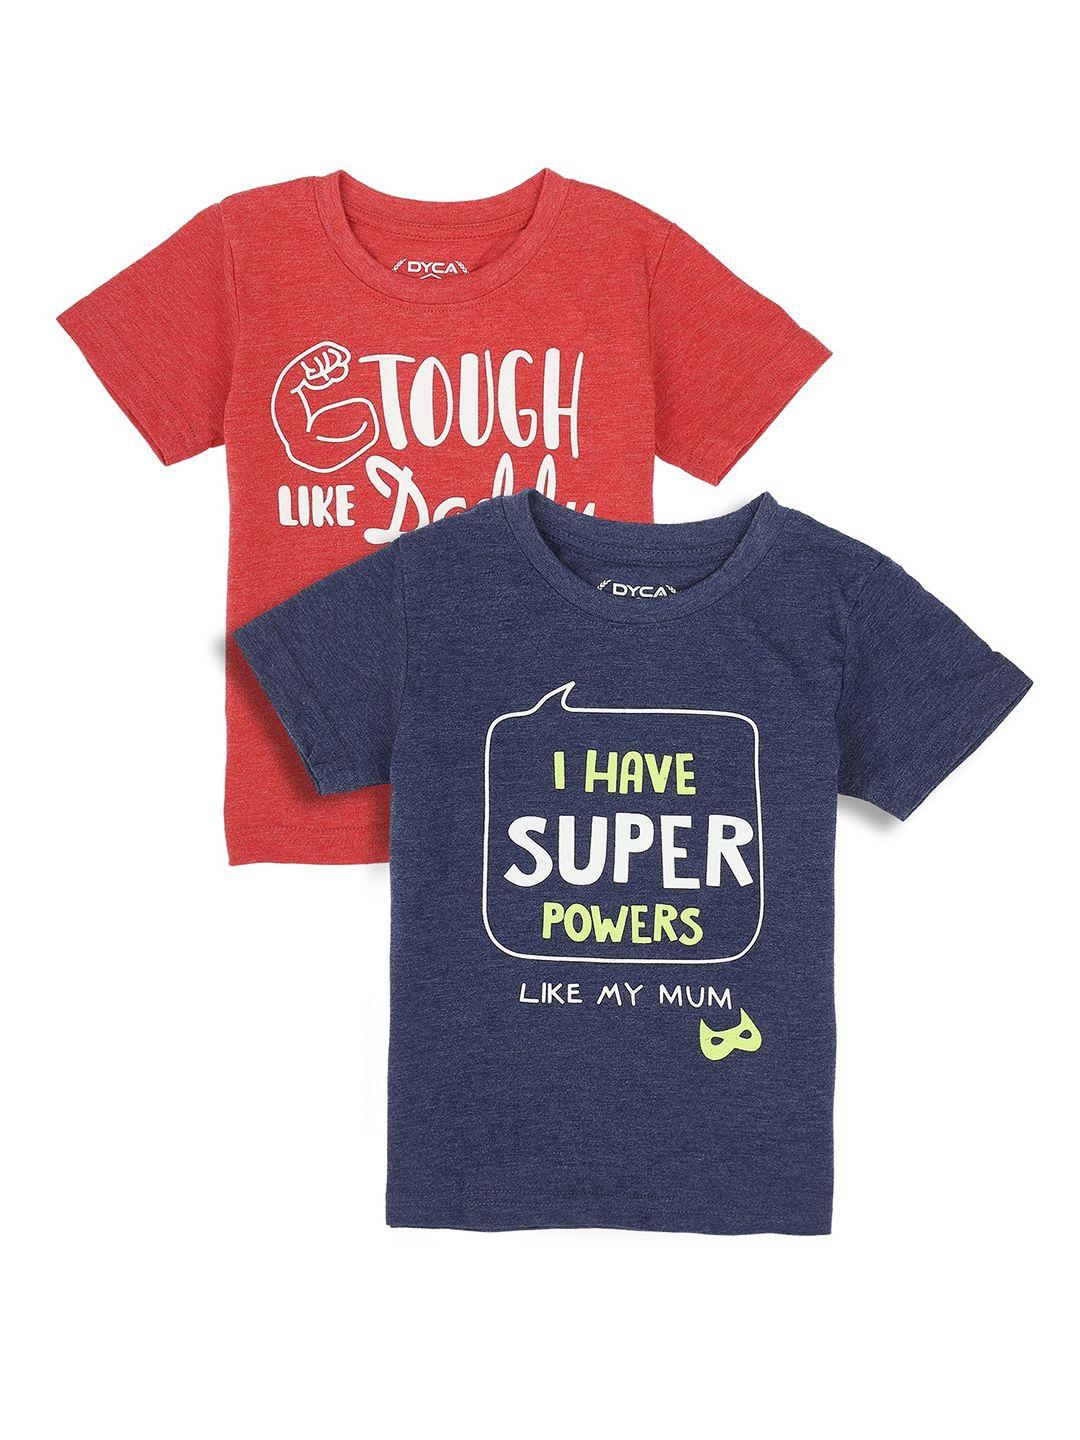 dyca boys red & navy blue pack of 2 printed cotton t-shirt